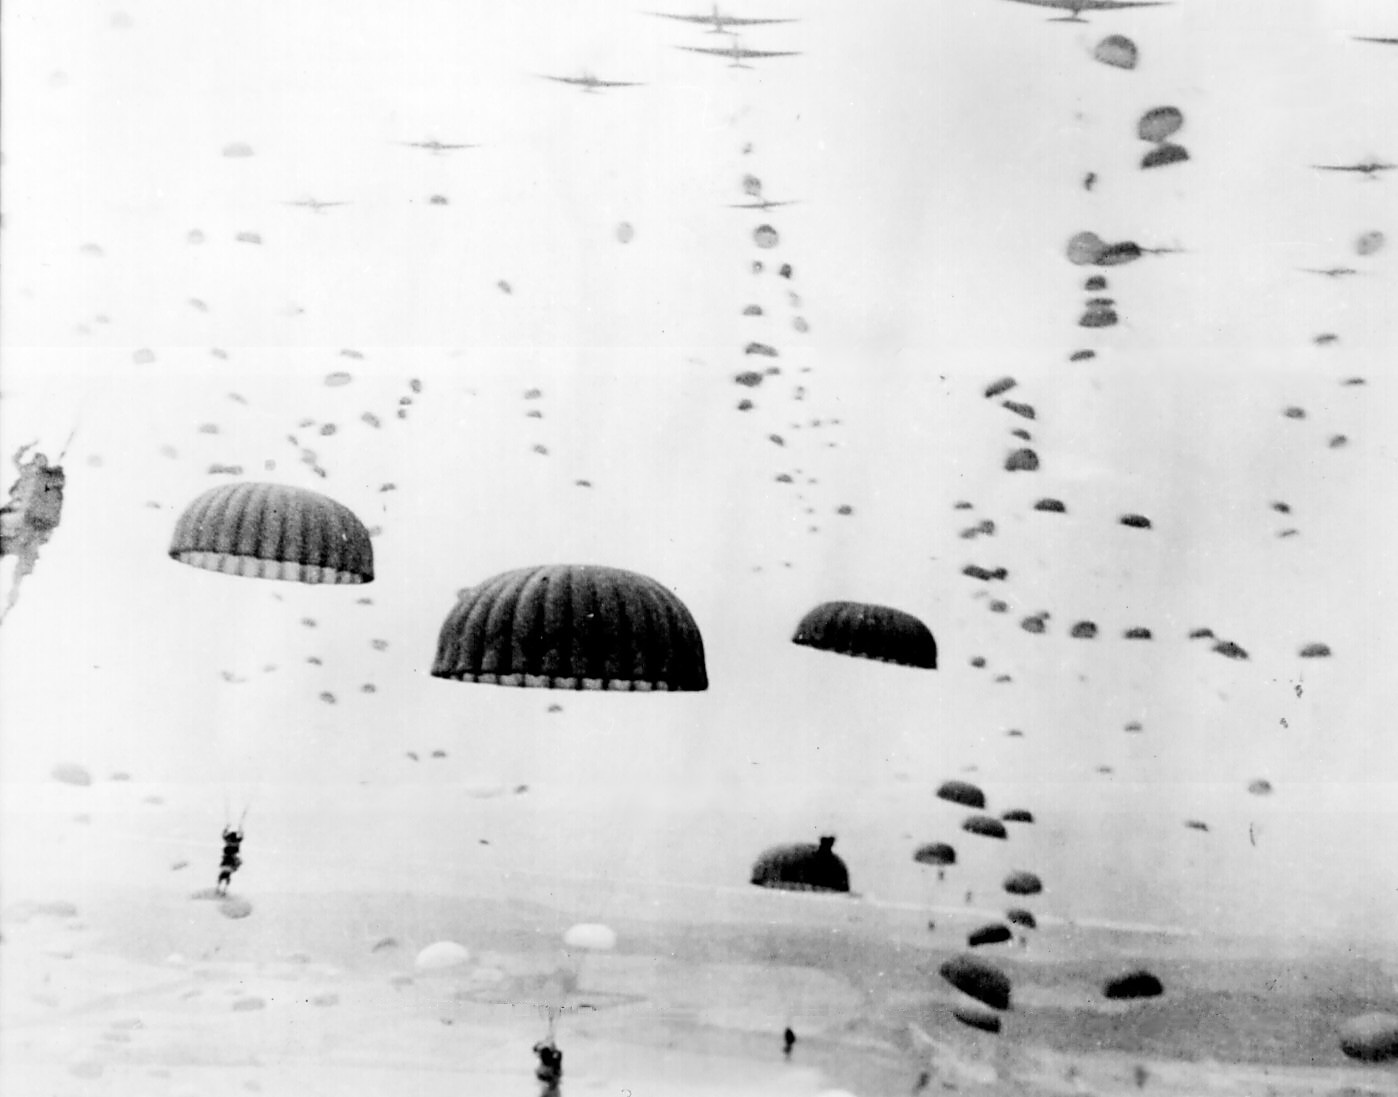 World War II: Surviving elements of the British 1st Airborne Division withdraw from Arnhem in the Netherlands, thus ending the Battle of Arnhem and Operation Market Garden